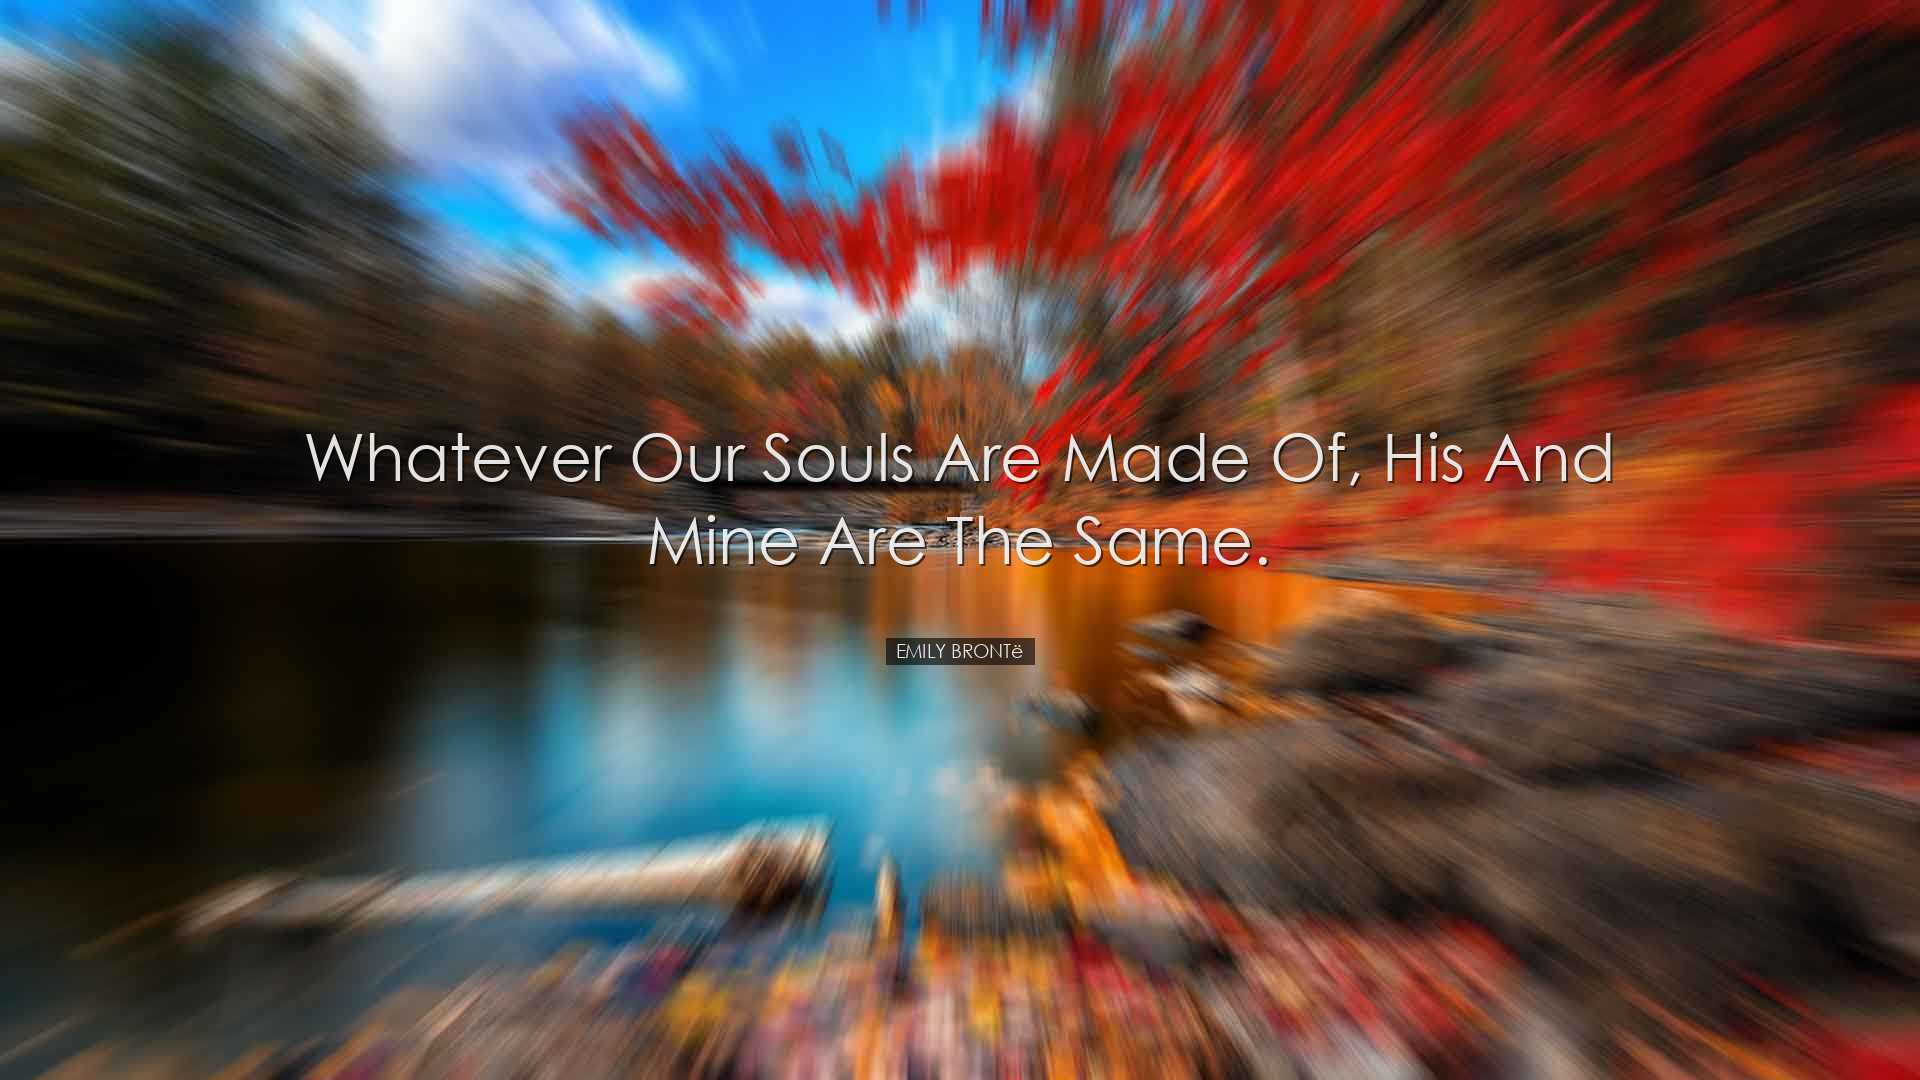 Whatever our souls are made of, his and mine are the same. - Emily